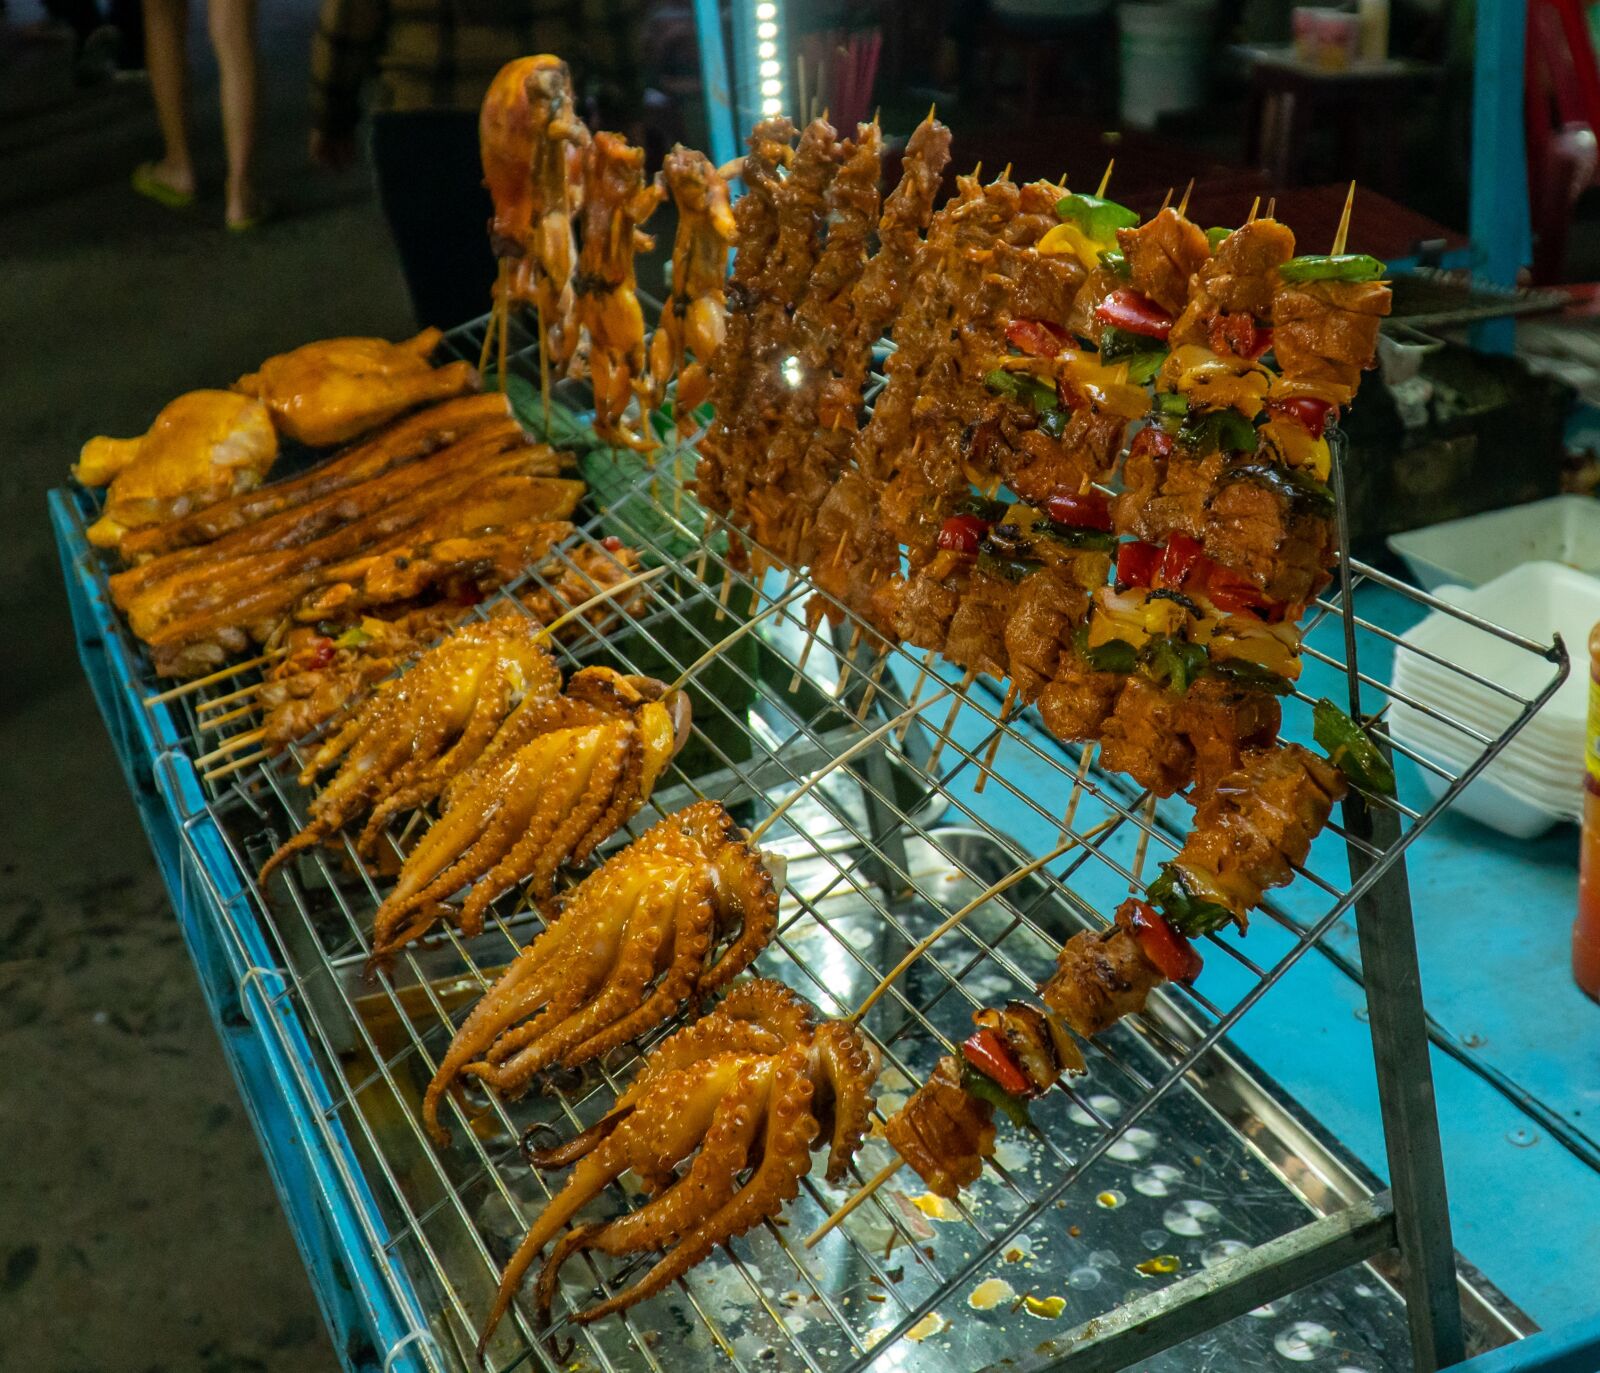 Sony a6300 sample photo. Meat, skewer, food photography